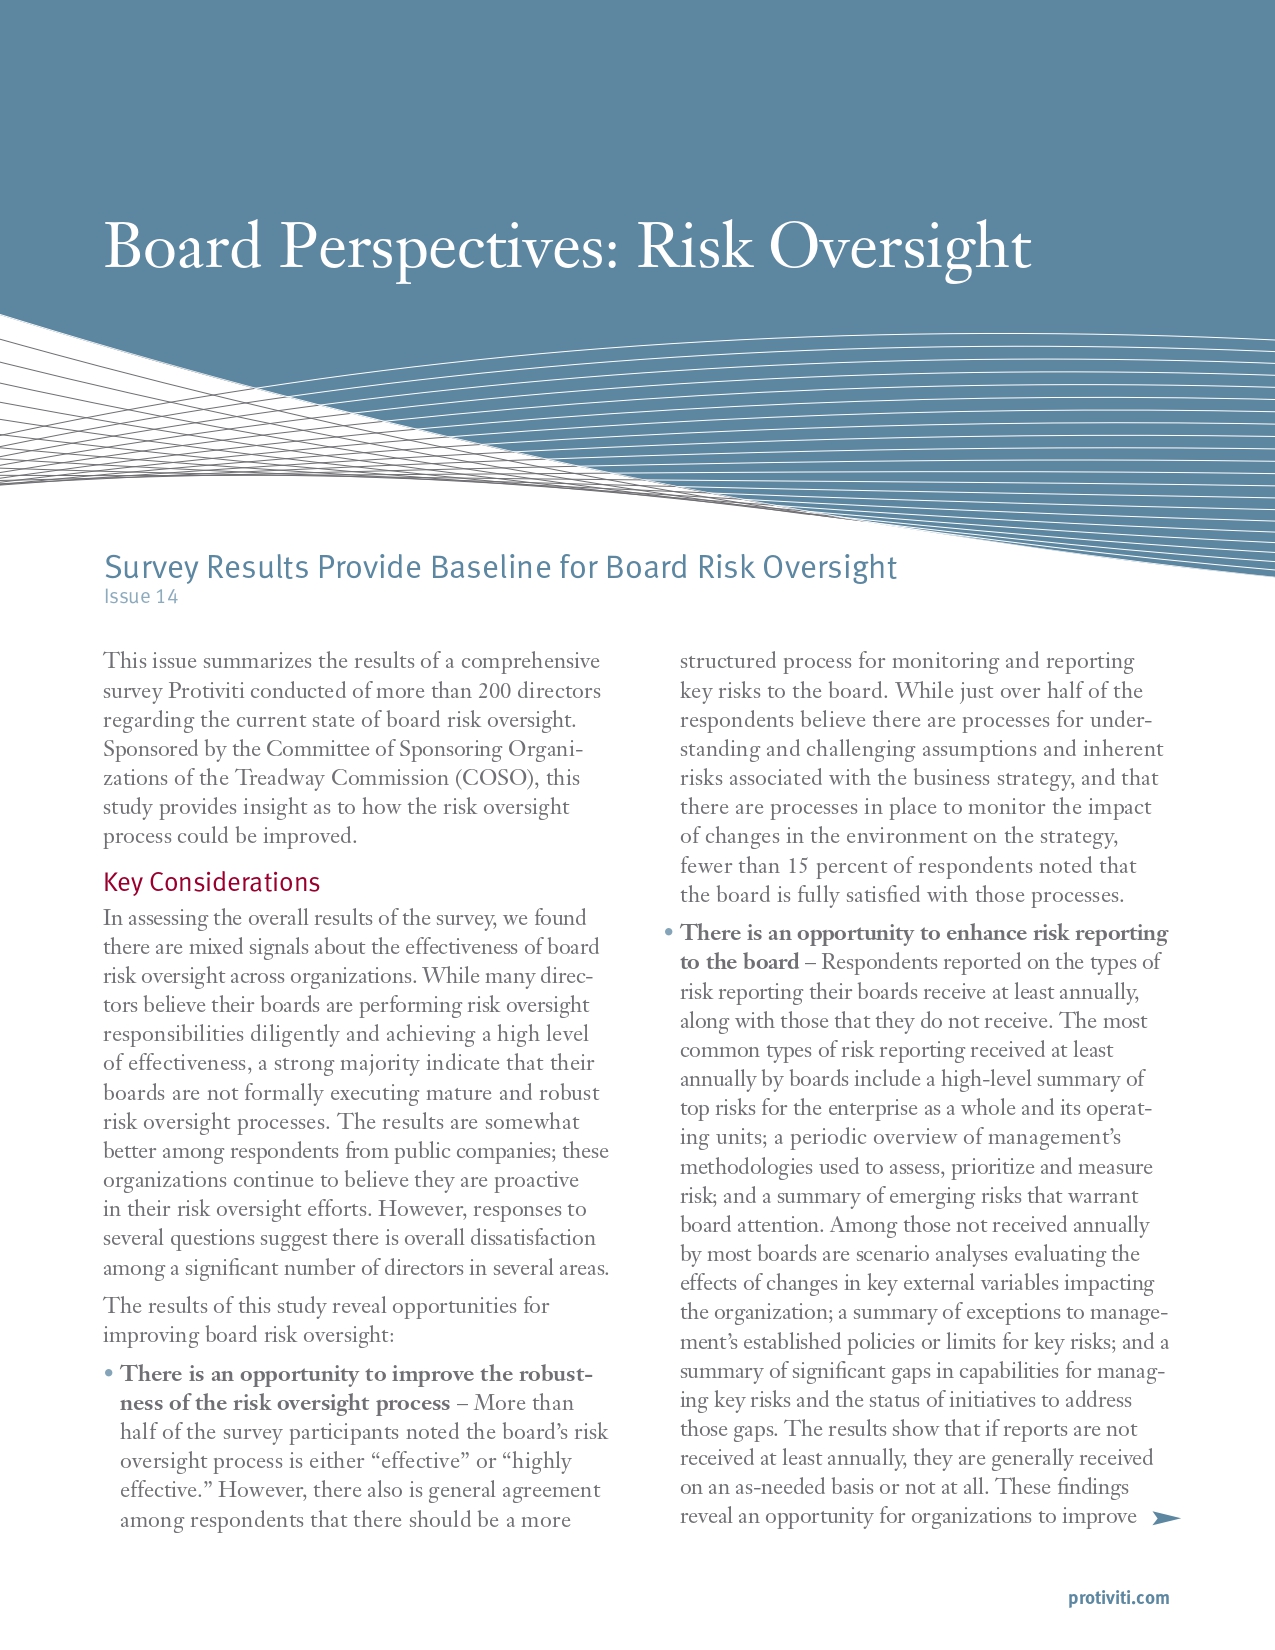 Screenshot of the first page of Survey Results Provide Baseline for Board Risk Oversight